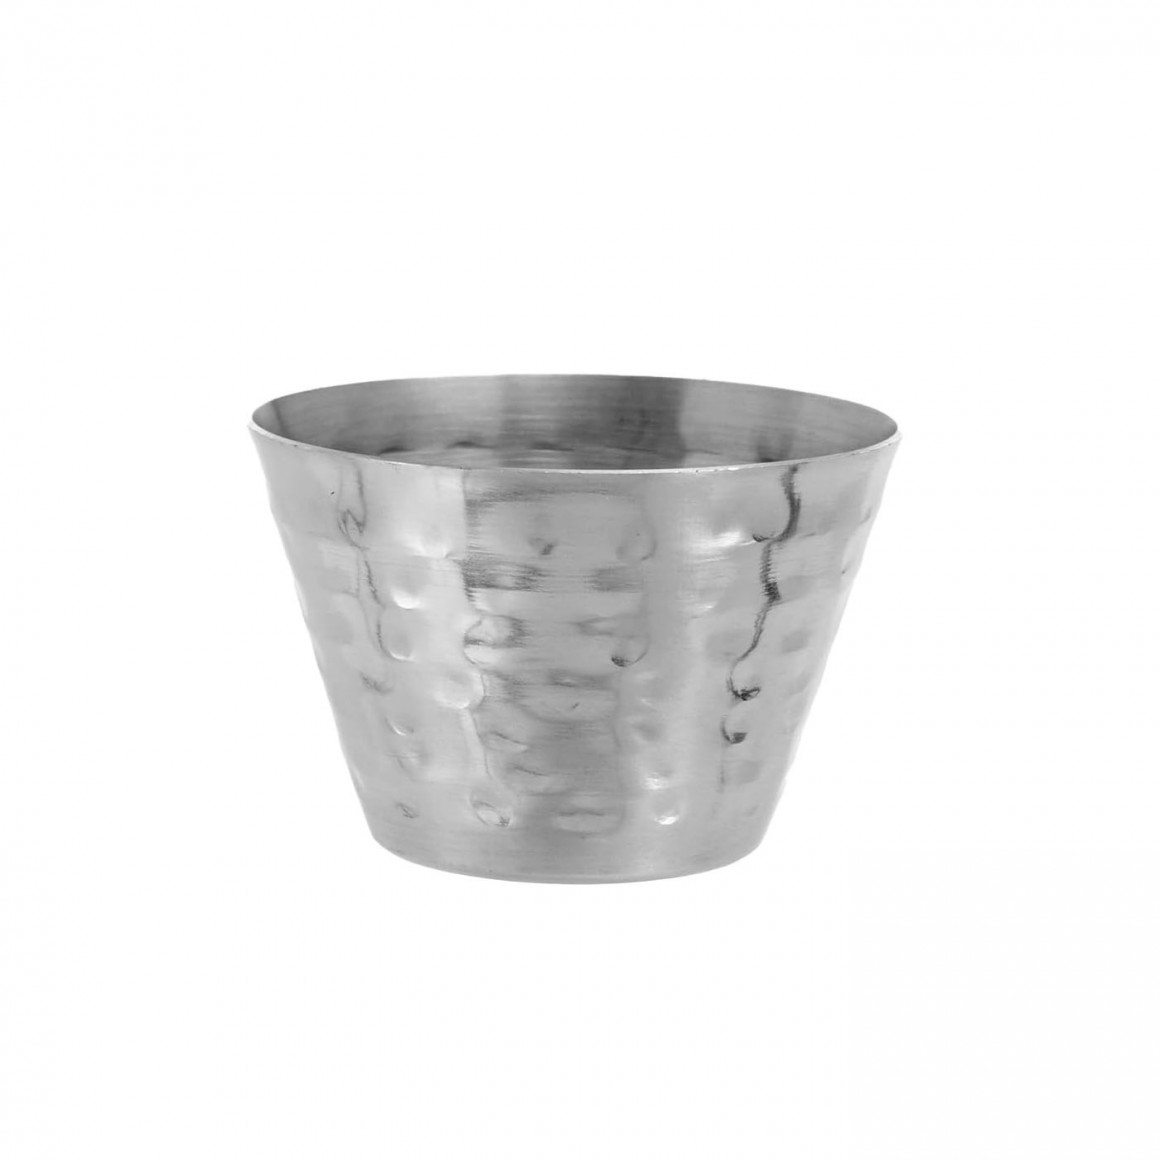 SAUCE CUP, STAINLESS STEEL, ROUND, HAMMERED, 4 OZ.